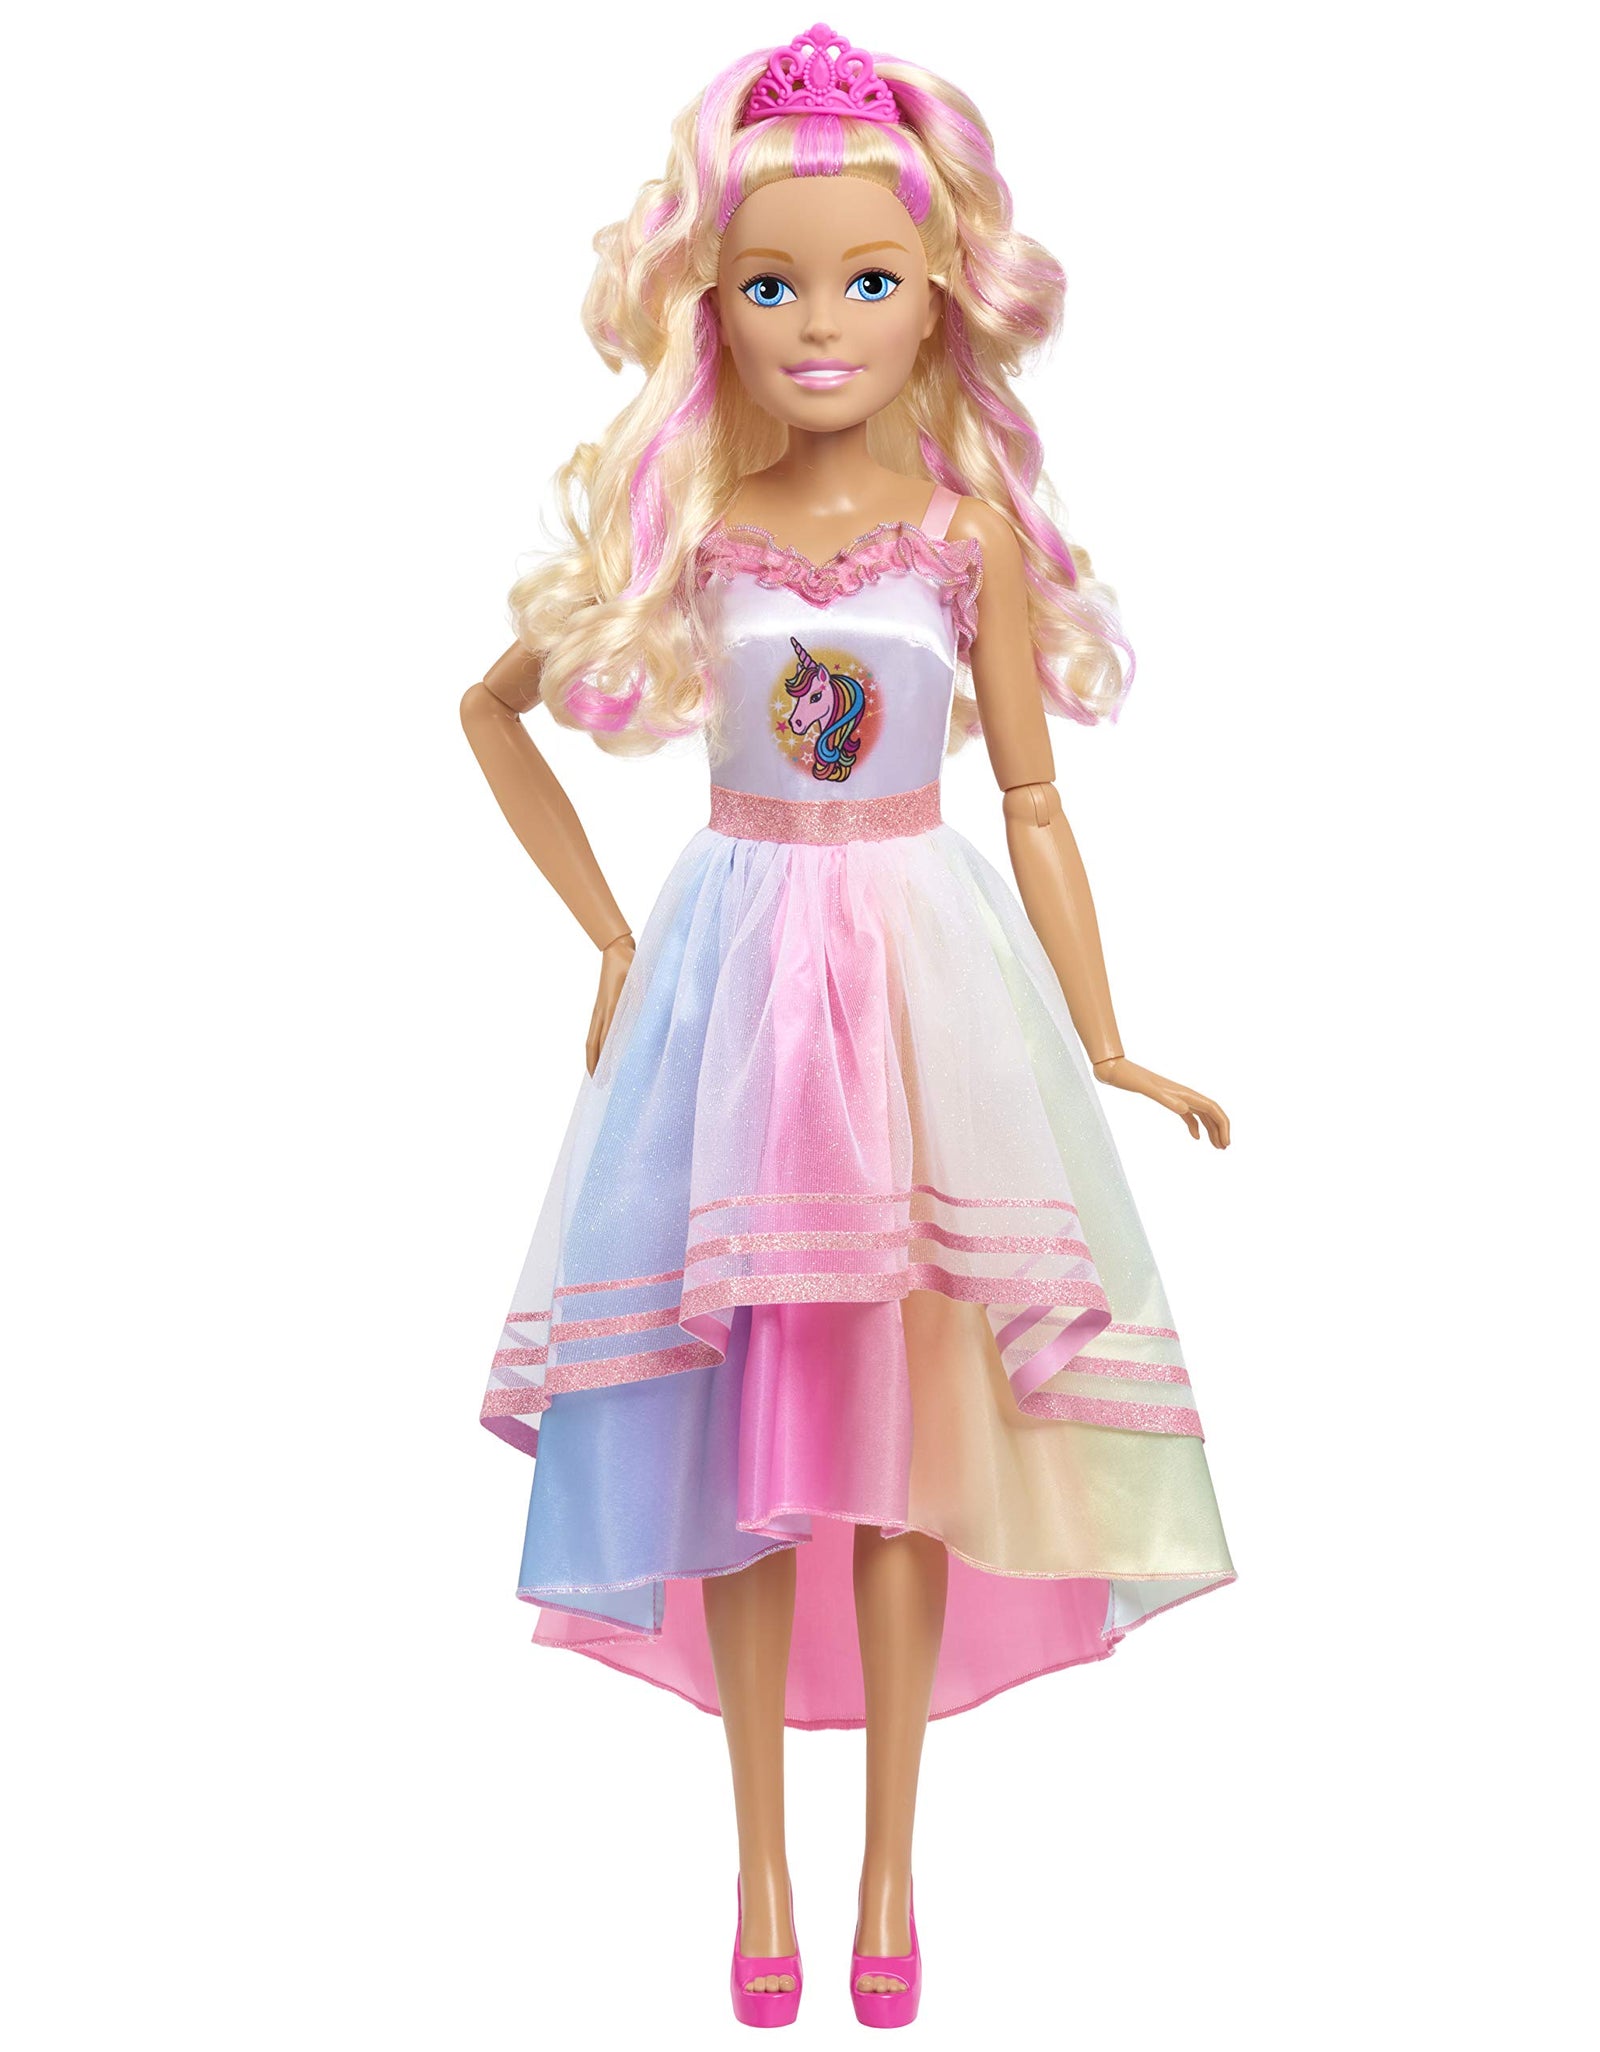 Barbie 28-inch Best Fashion Friend Unicorn Party Doll, Blonde Hair, Amazon Exclusive, by Just Play